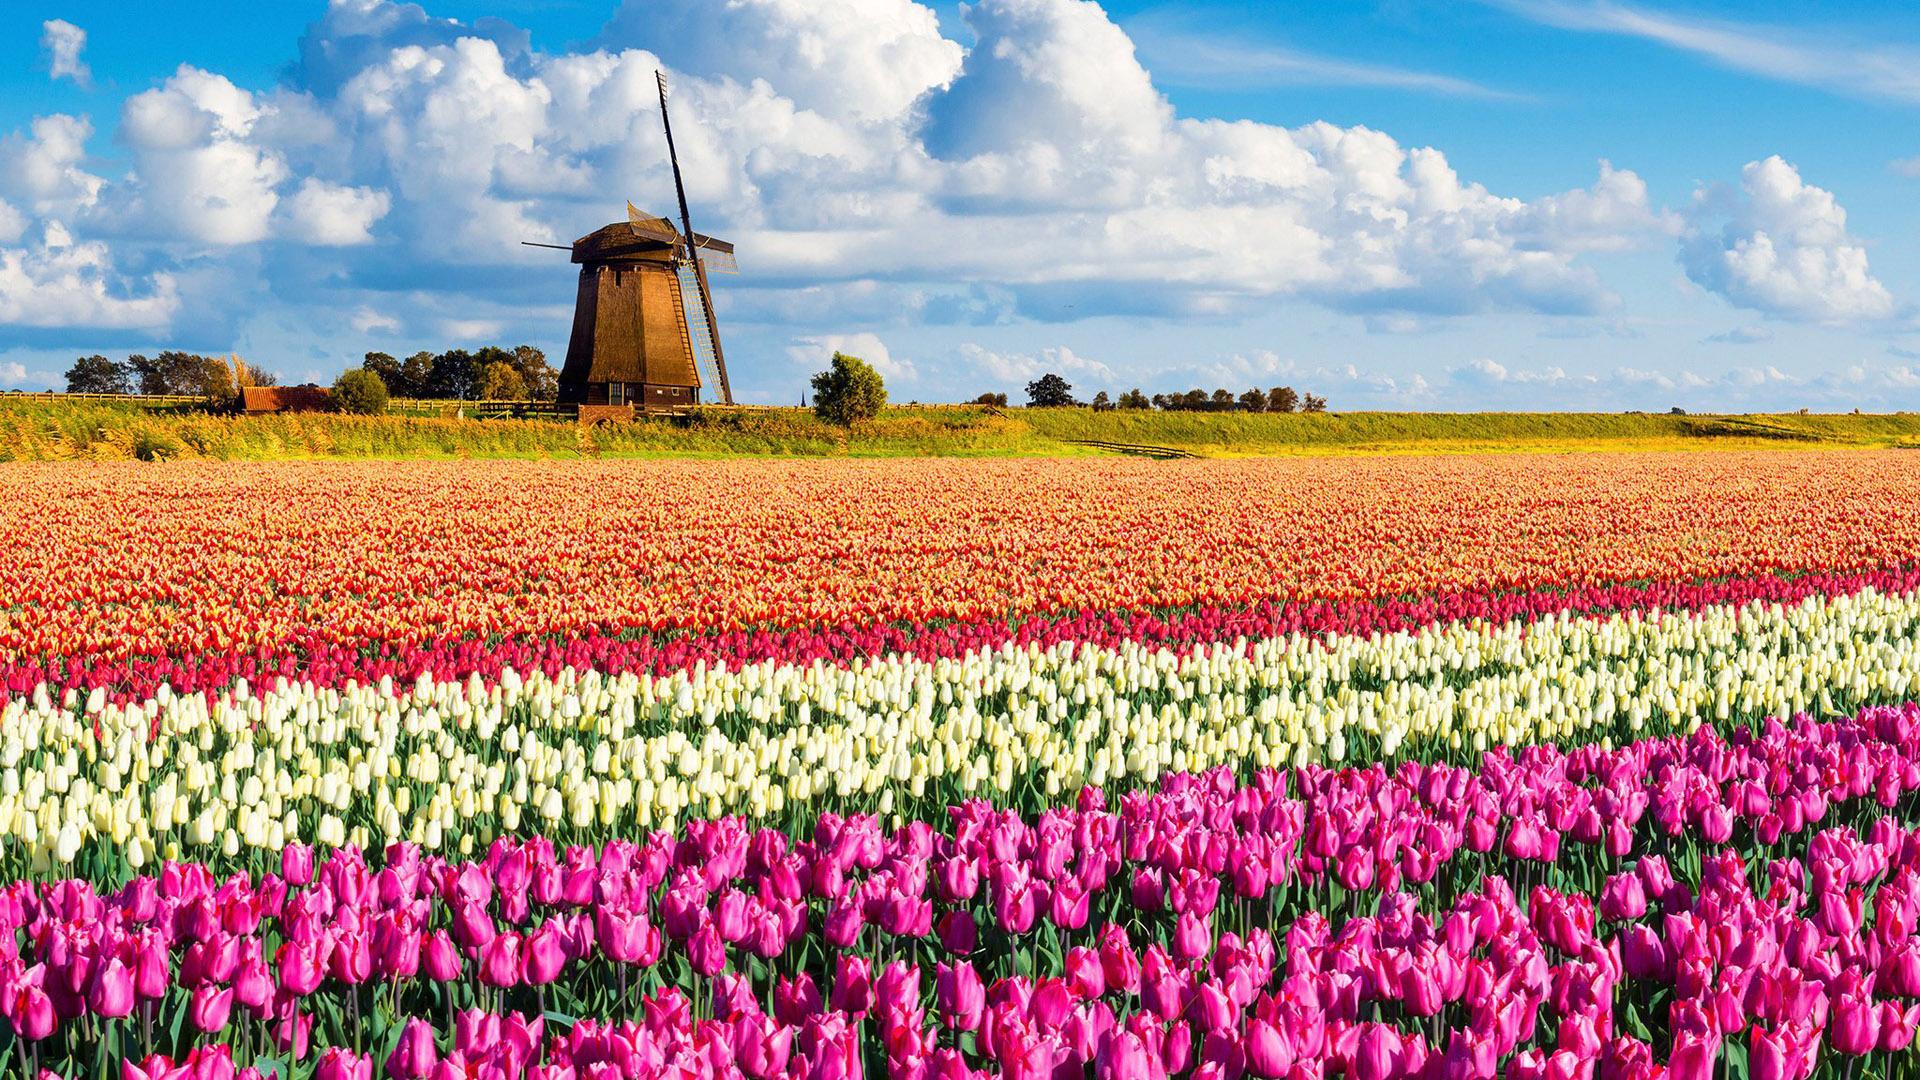 General 1920x1080 landscape Netherlands flowers windmill nature photography tulips